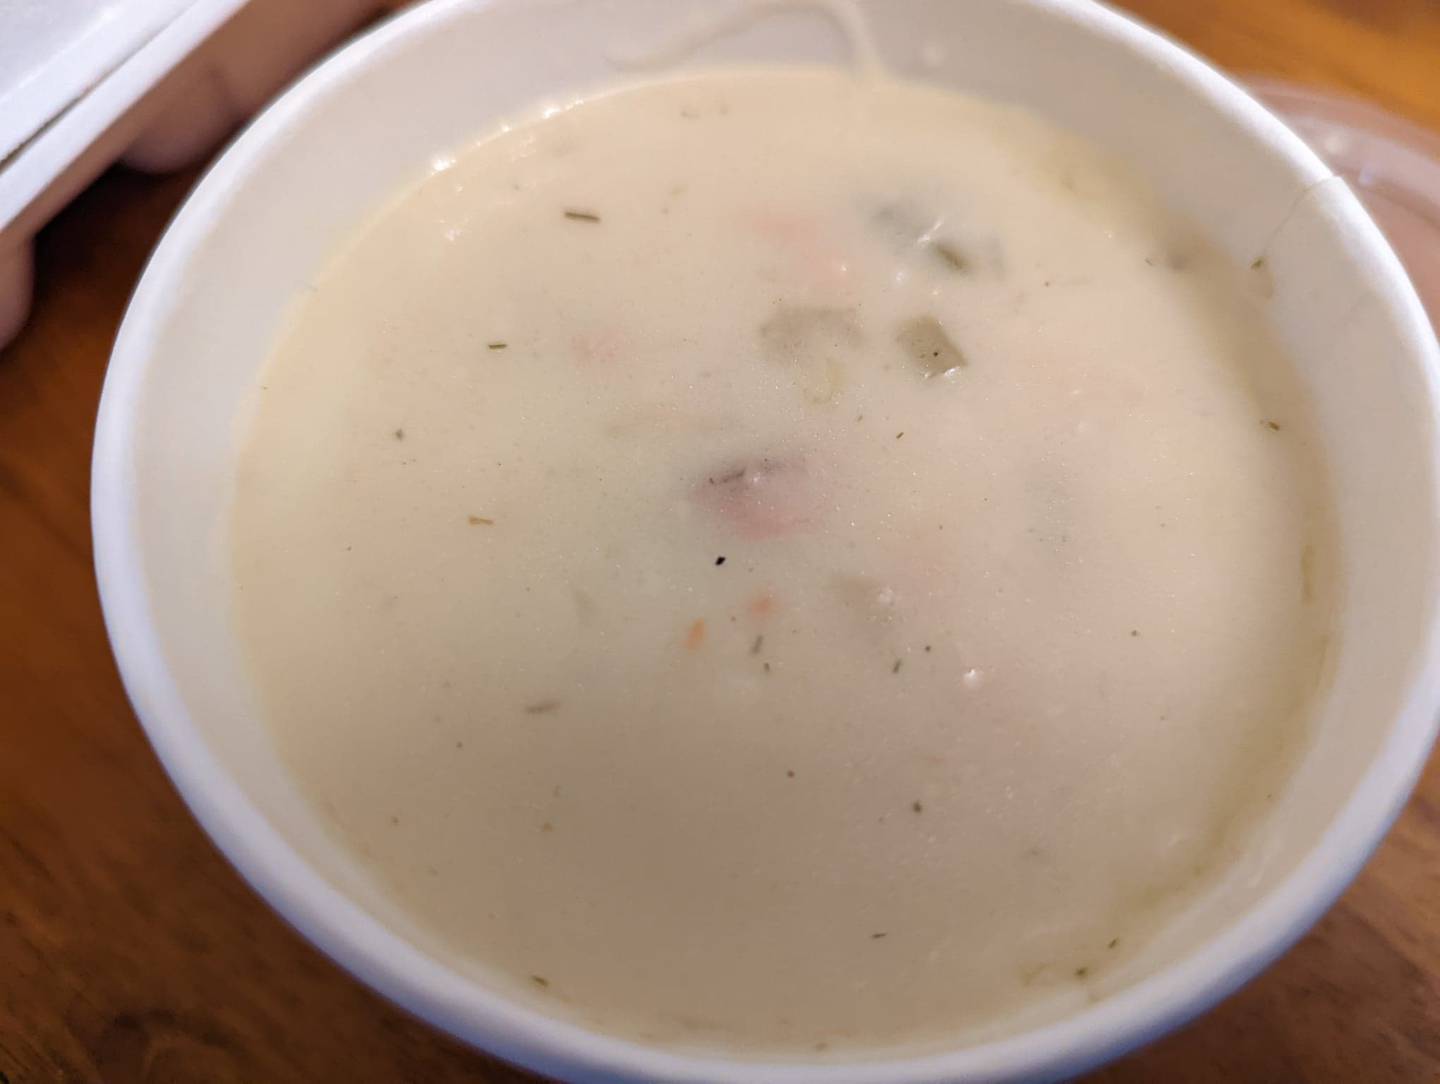 Pictured is the cream of chicken soup as served at Al's Steak House in Joliet. It was creamy and well-seasoned with a classic homestyle taste, the kind of soup that comforts you after a long day.